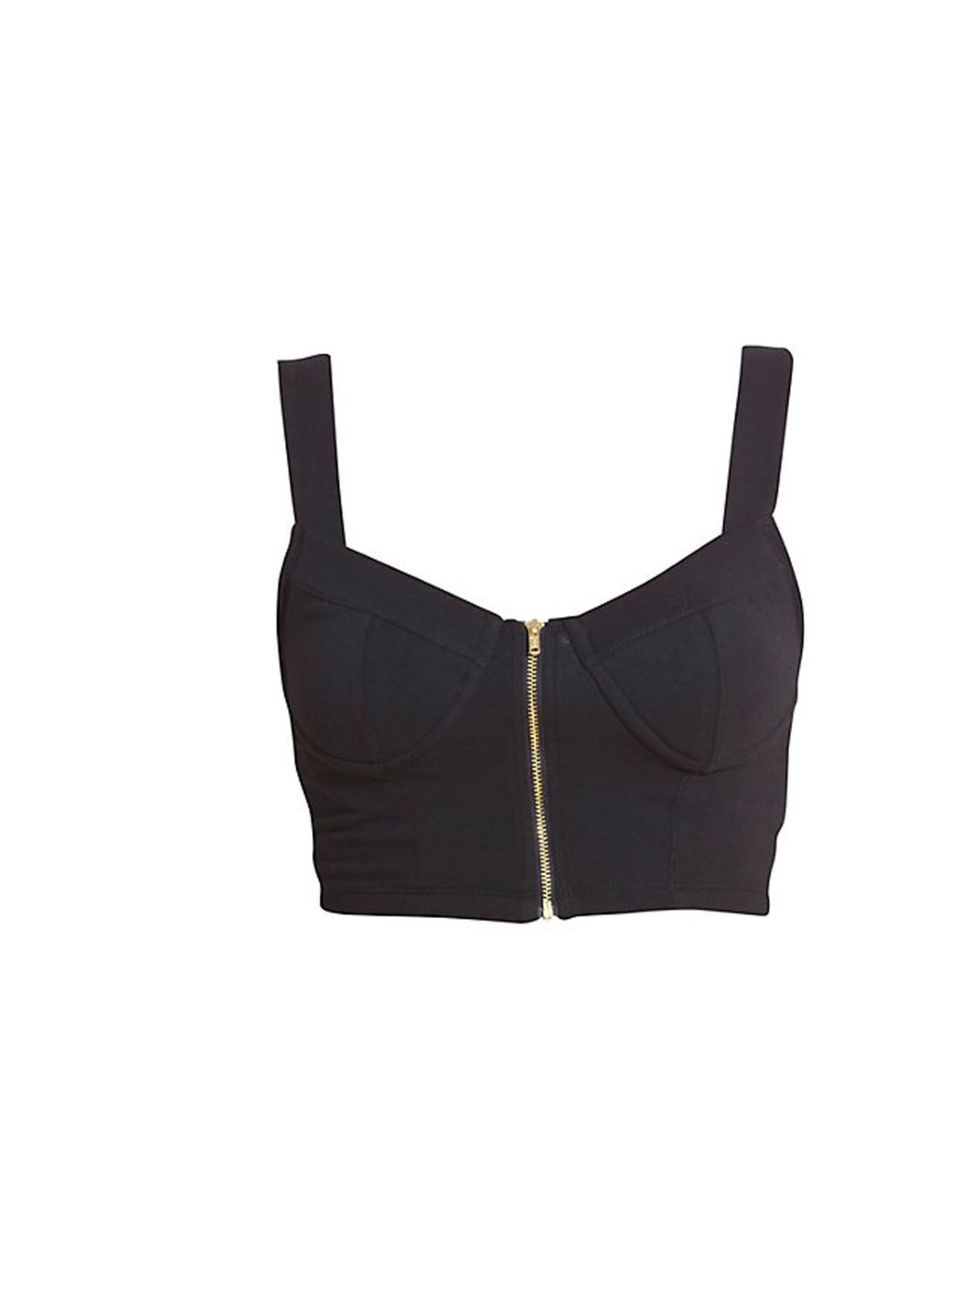 <p>Designer labels have put the bralet back on the fashion agenda for summer. But rather than spend a fortune on this micro trend we suggest you head to New Look <a href="http://www.newlook.com/shop/womens/tops/black-bra-top-with-zip-fastening_250267801"